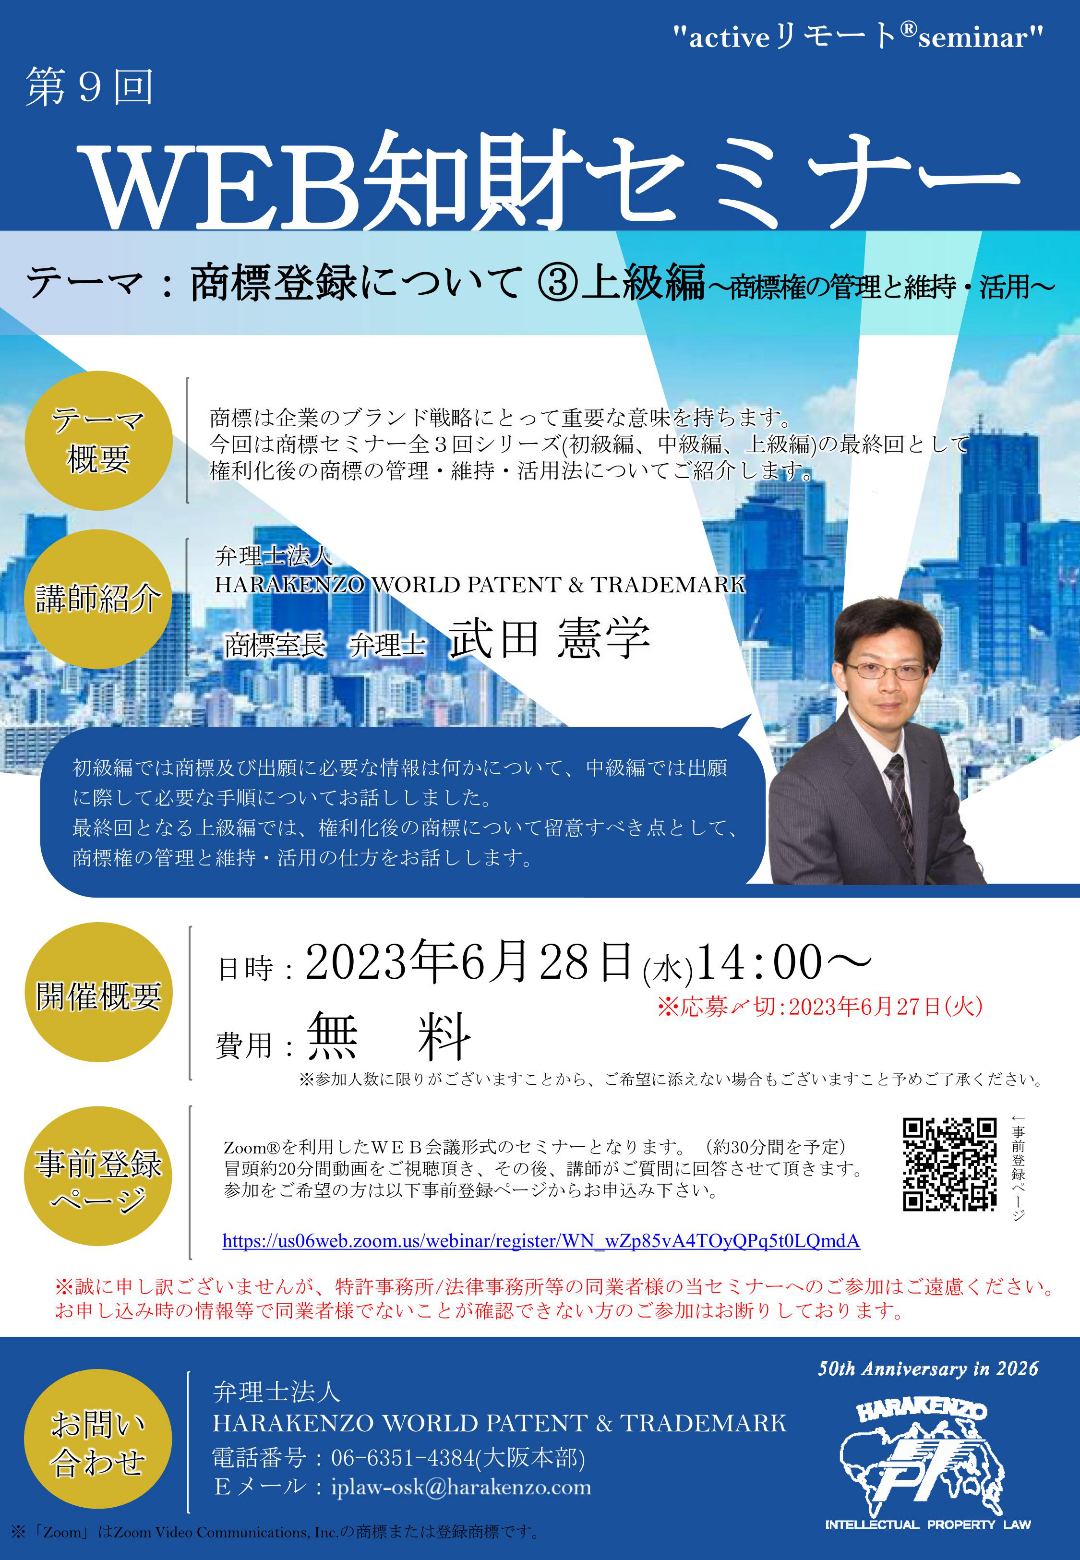 About trademark registration ③Advanced edition: Management, maintenance, and utilization of trademark rights. Please feel free to apply and participate using your smartphone, tablet, or computer.